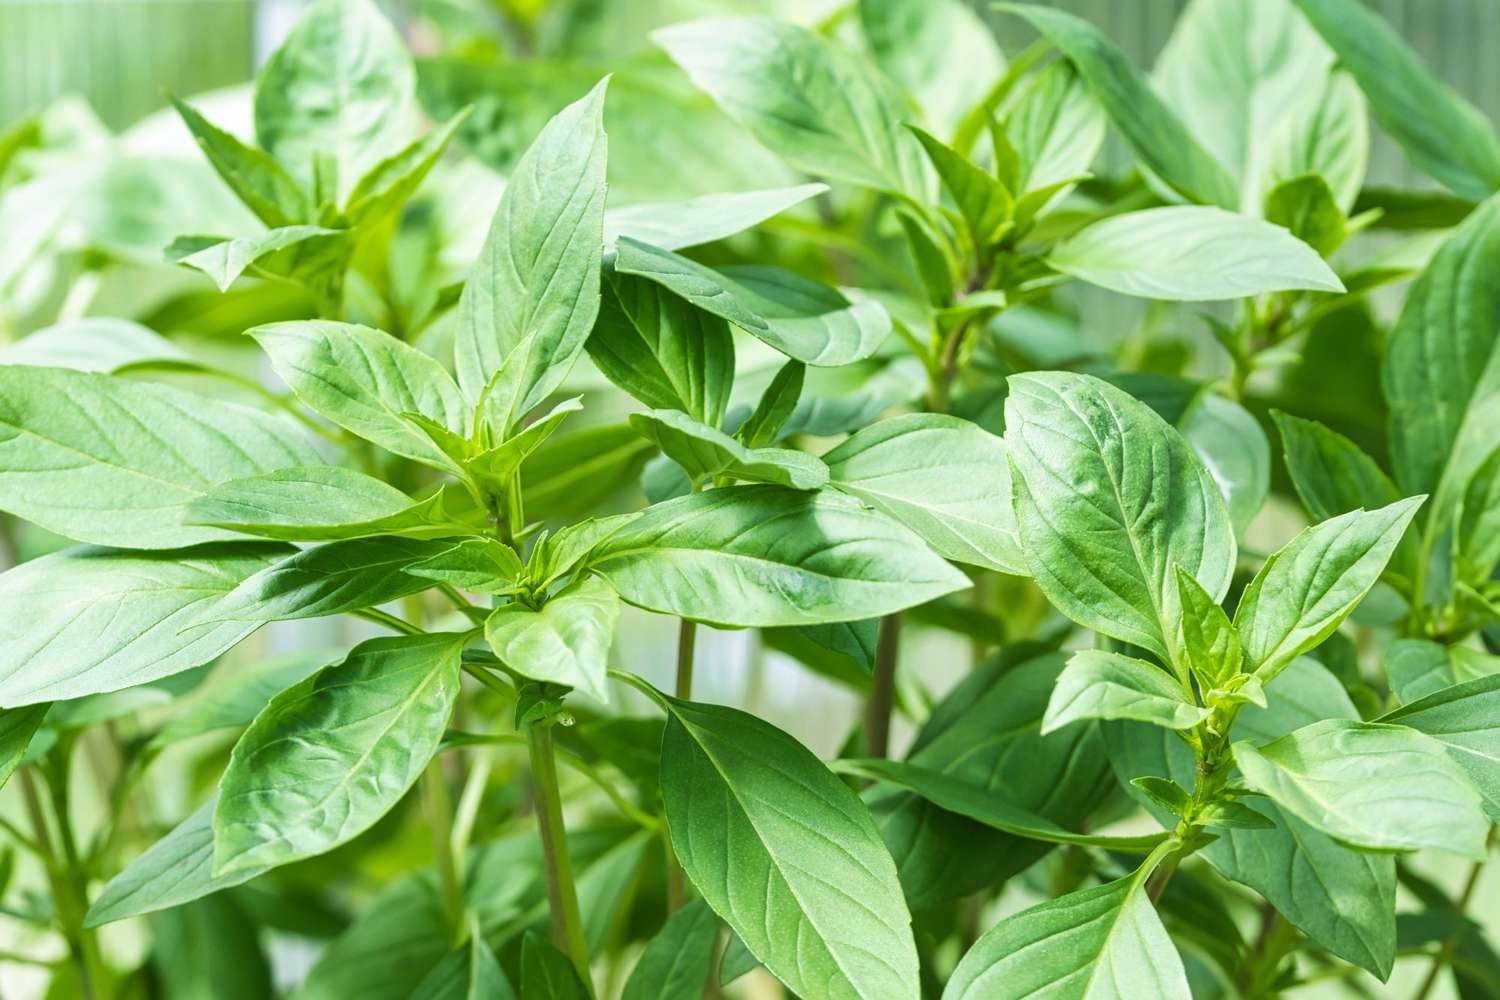 Thai basil young plant close up, fresh green leaves of an aromatic herb